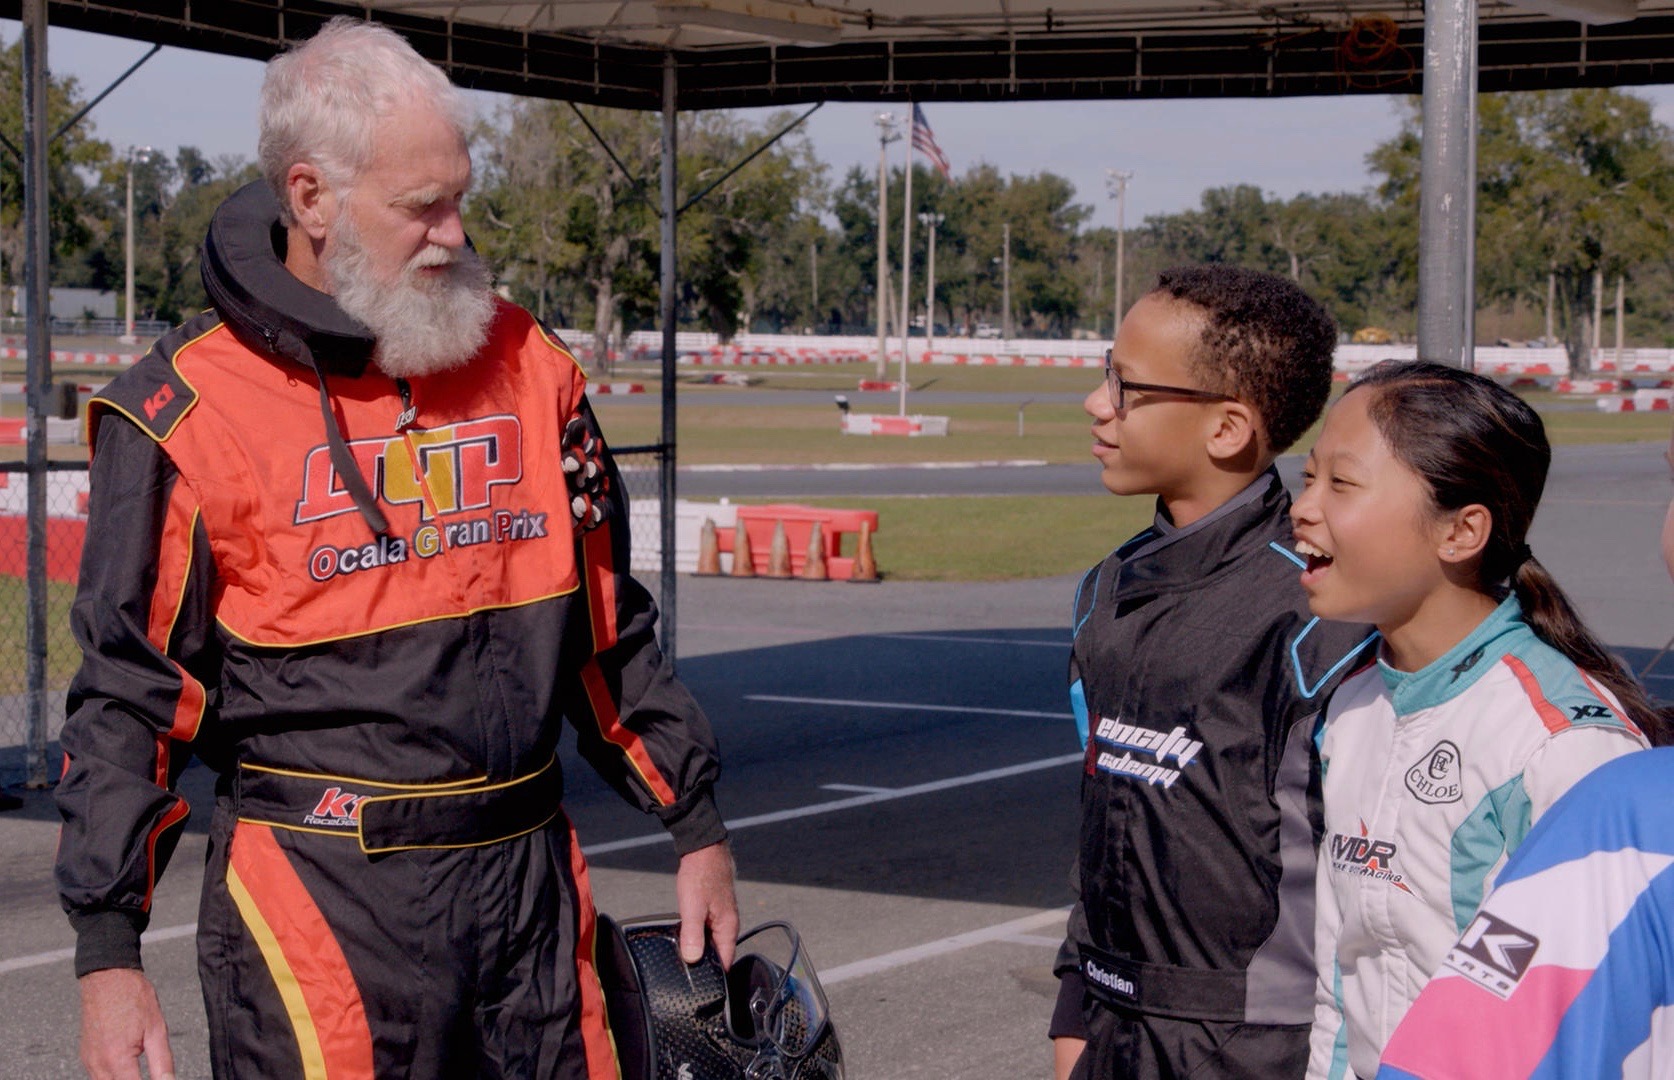 Letterman, Letterman introduces Lewis Hamilton to another audience, ClassicCars.com Journal